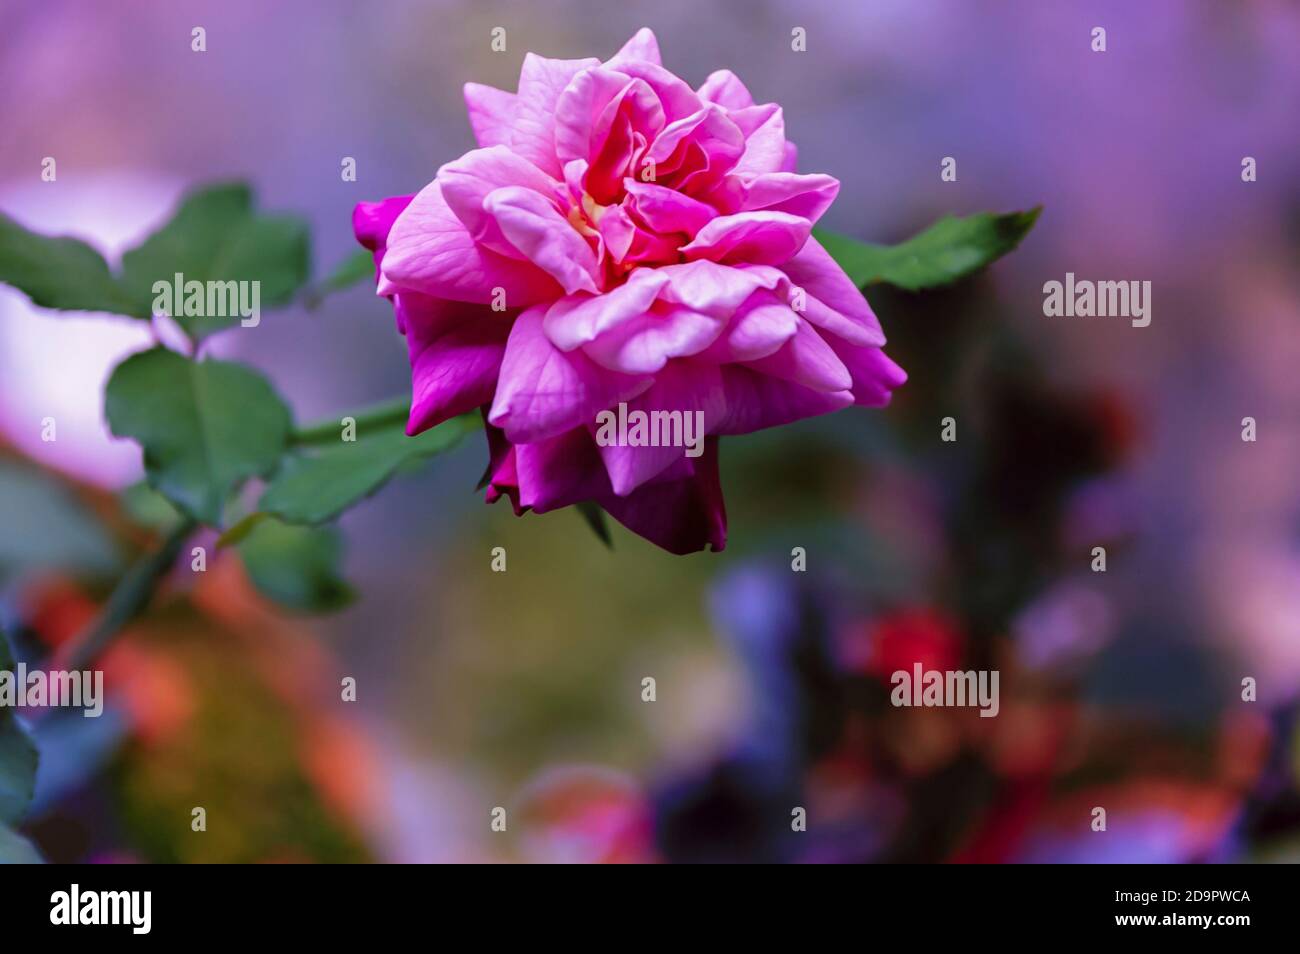 A close up of a pink rose in a home garden. Stock Photo